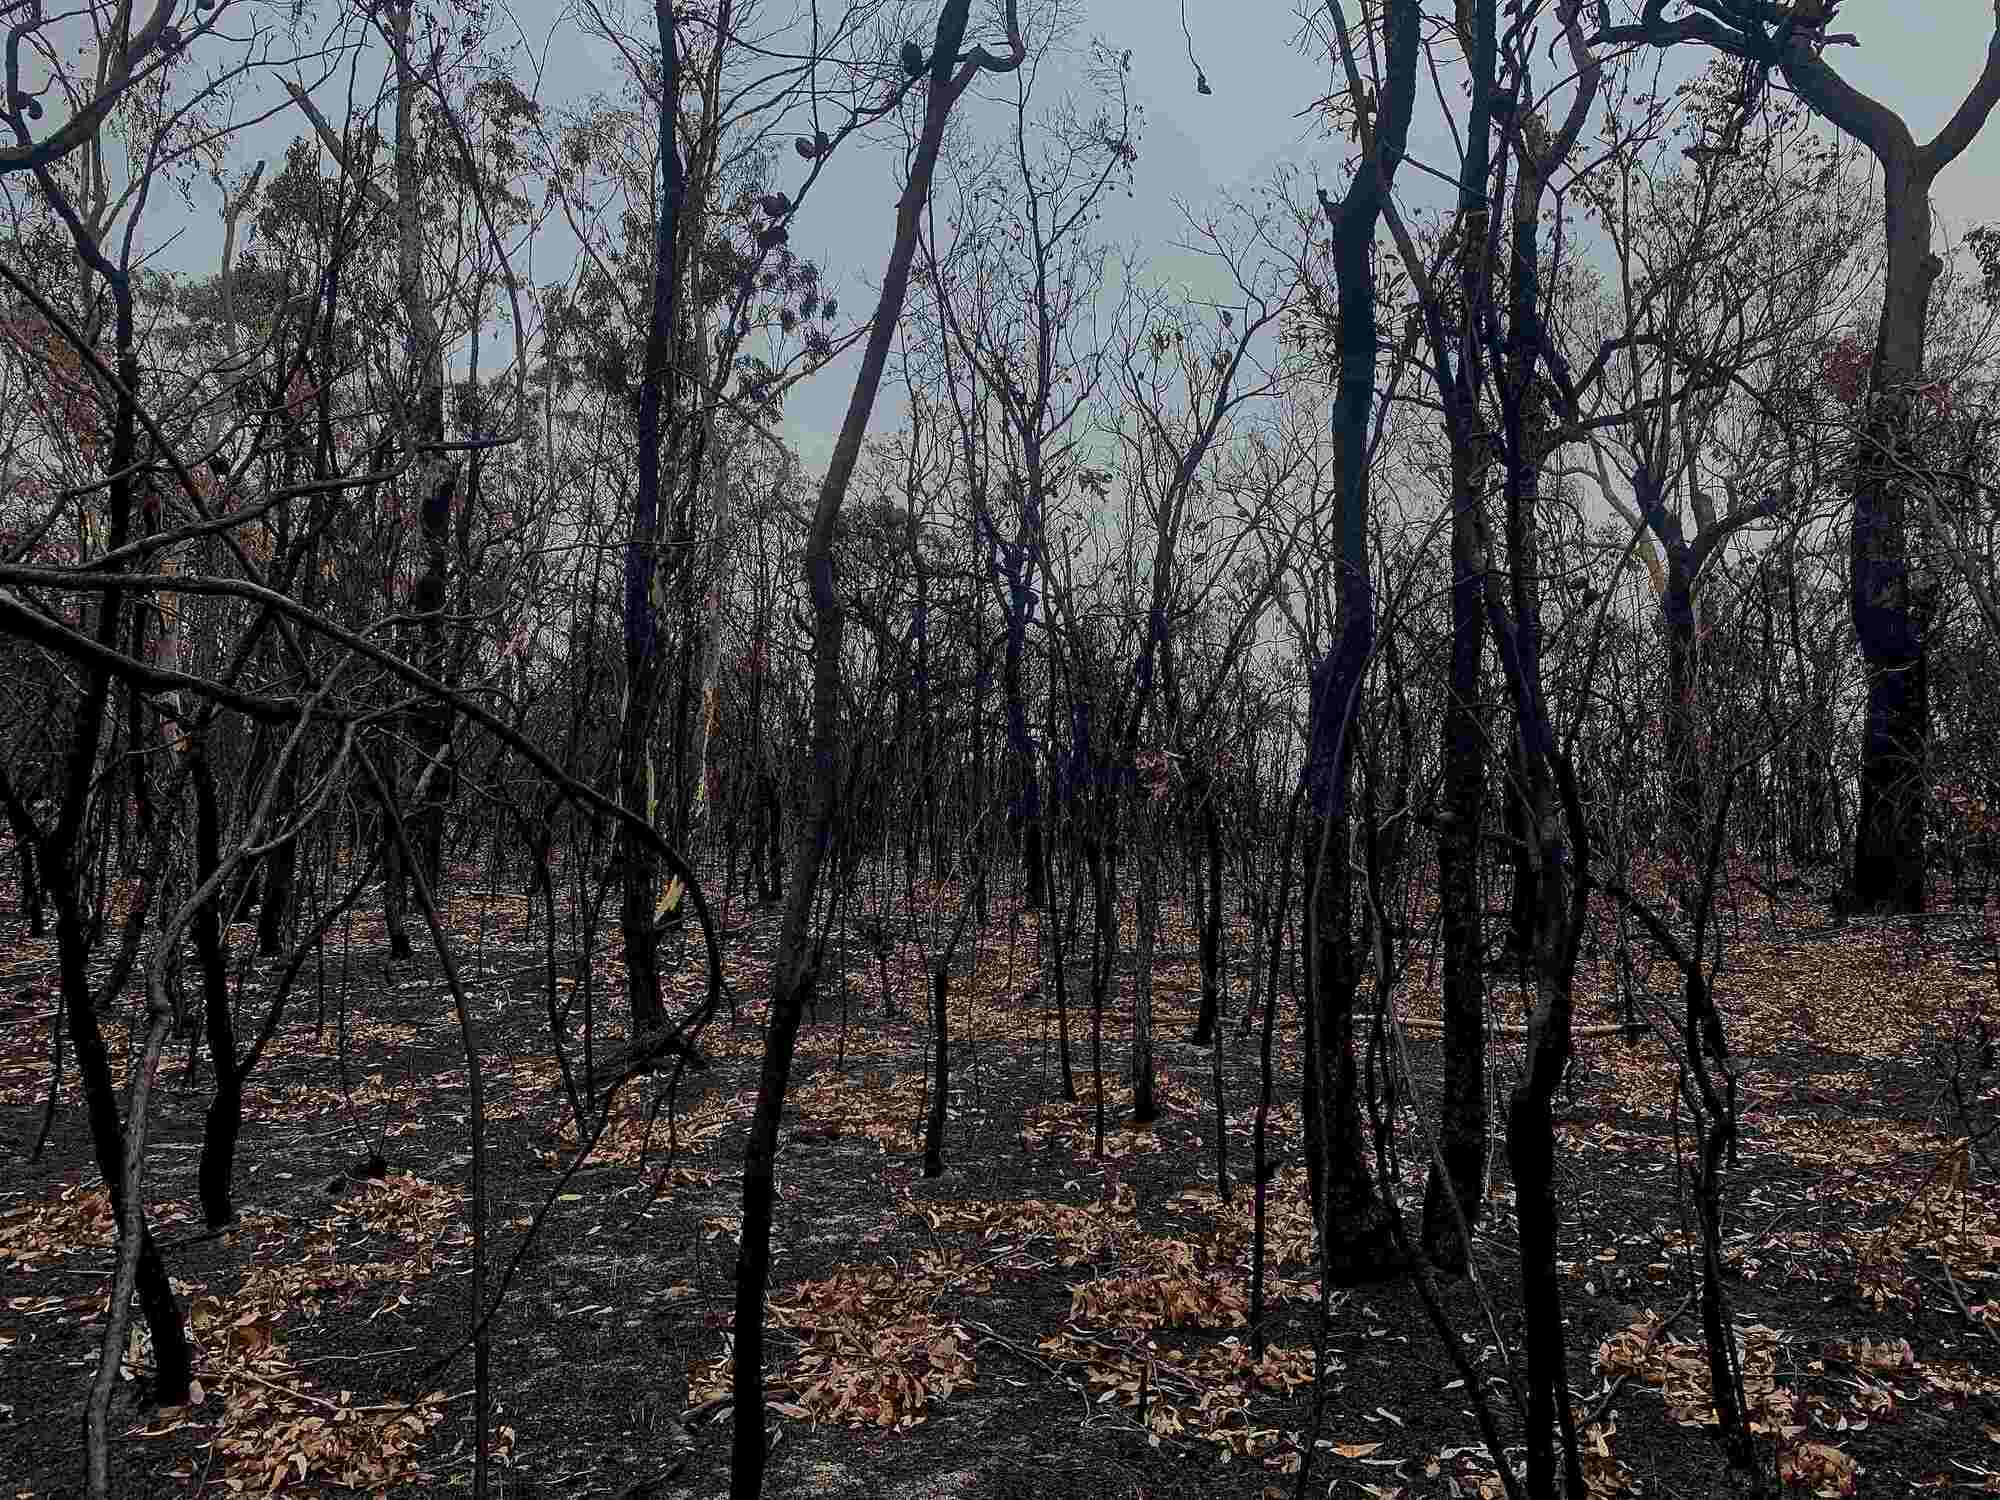 Photograph of a burnt forest in Yengo National Park, Australia, as a result of the 2019 to 2020 summer bushfires. The photo shows a forest of trees with thin, black trunks. The ground around the trees is also black and littered with dead brown leaves.